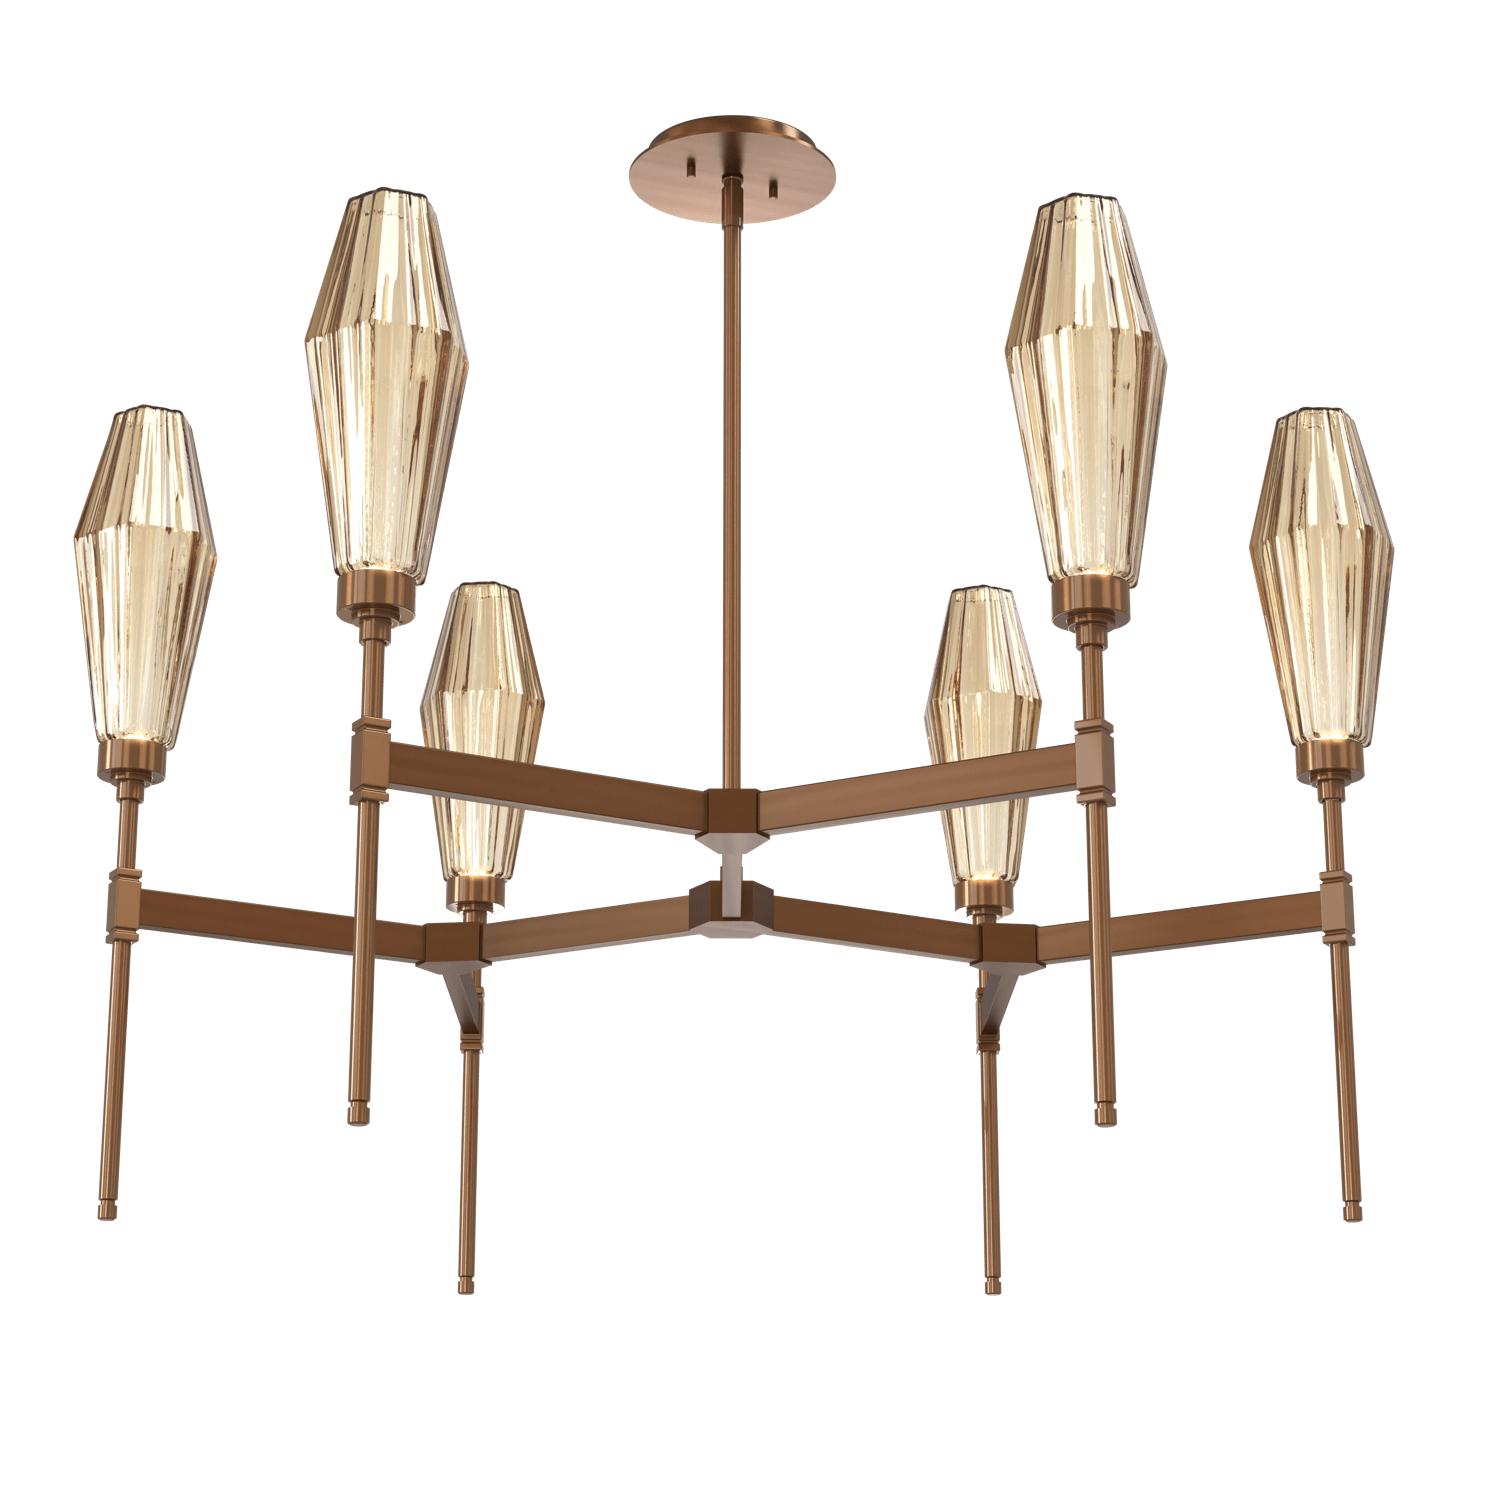 CHB0049-37-RB-RB-Hammerton-Studio-Aalto-37-inch-round-belvedere-chandelier-with-oil-rubbed-bronze-finish-and-optic-ribbed-bronze-glass-shades-and-LED-lamping